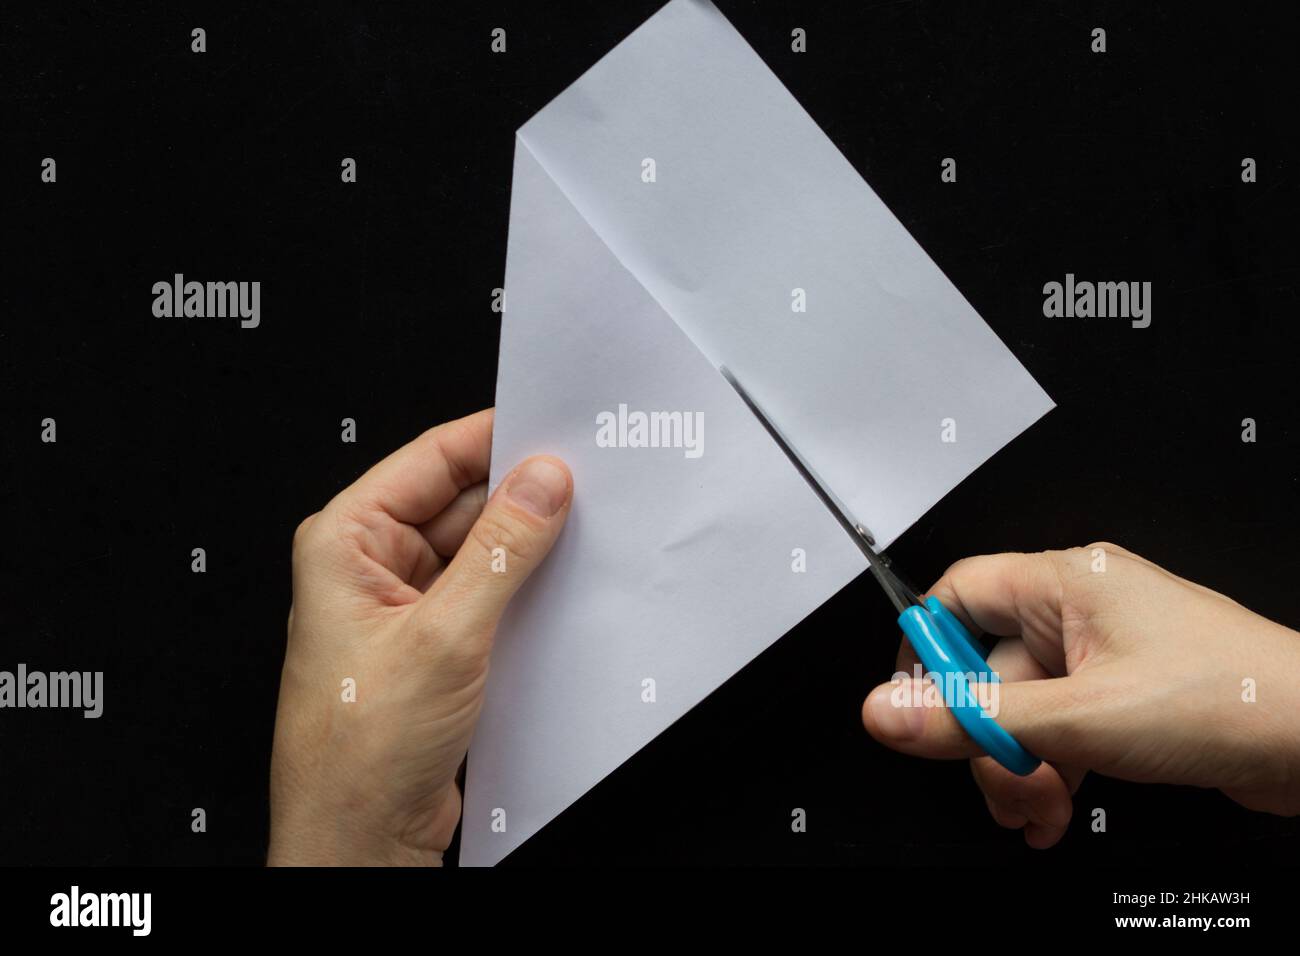 Woman hands cutting away excess edge of paper to make it square on black background Stock Photo